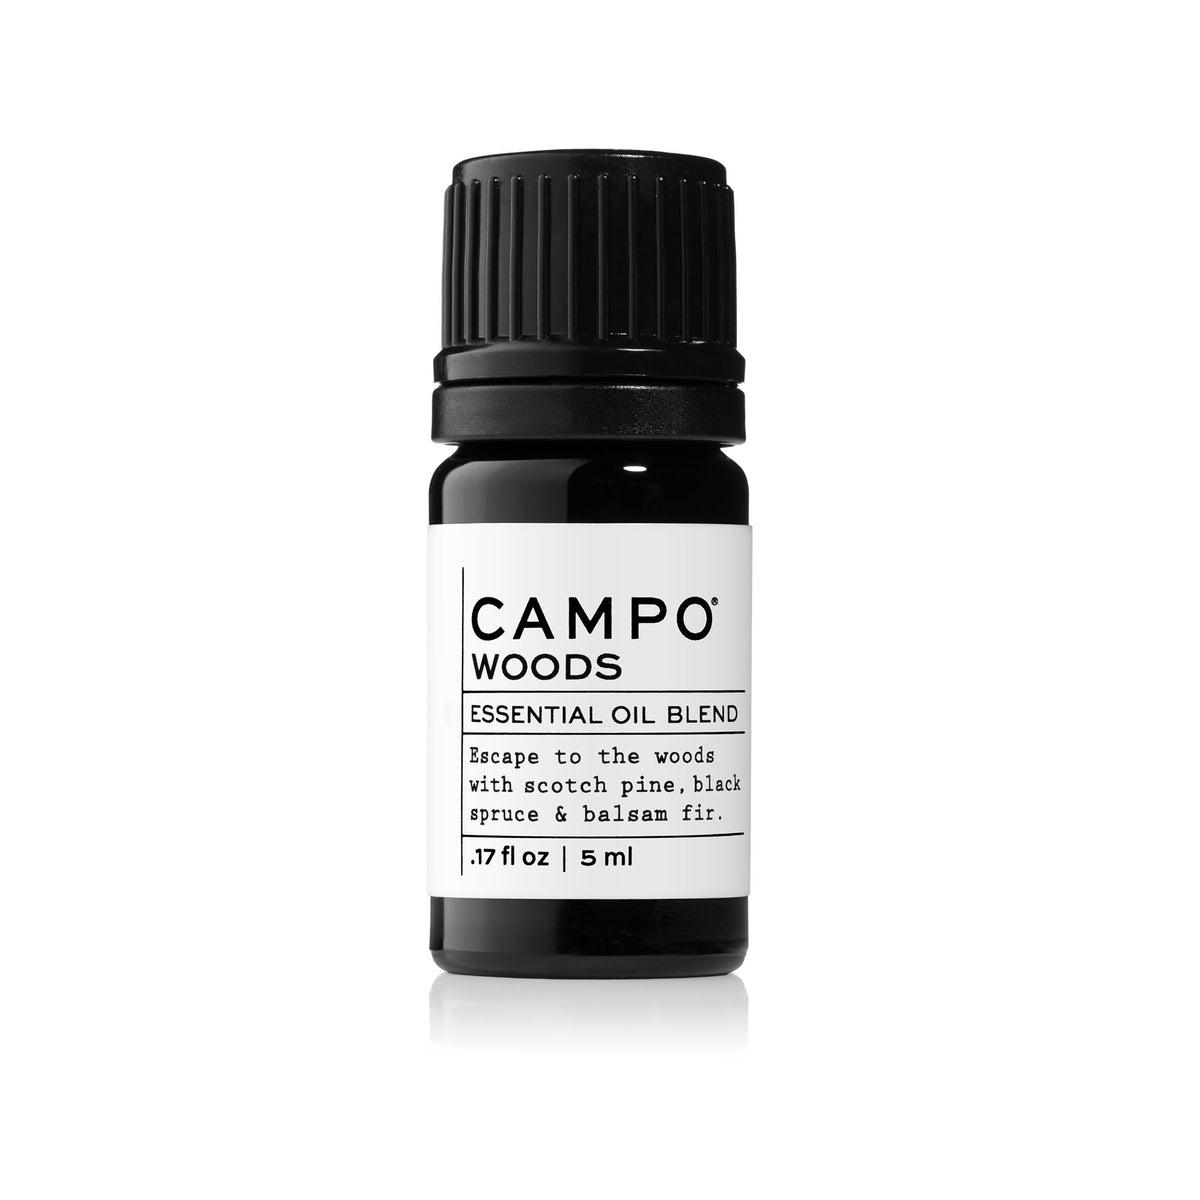 Campo Beauty WOODS Blend 5 ml Essential Oil. Escape to the woods with this 100% pure essential oil blend of pine scotch, siberian fir, balsam fir, black spruce, and bergamot.